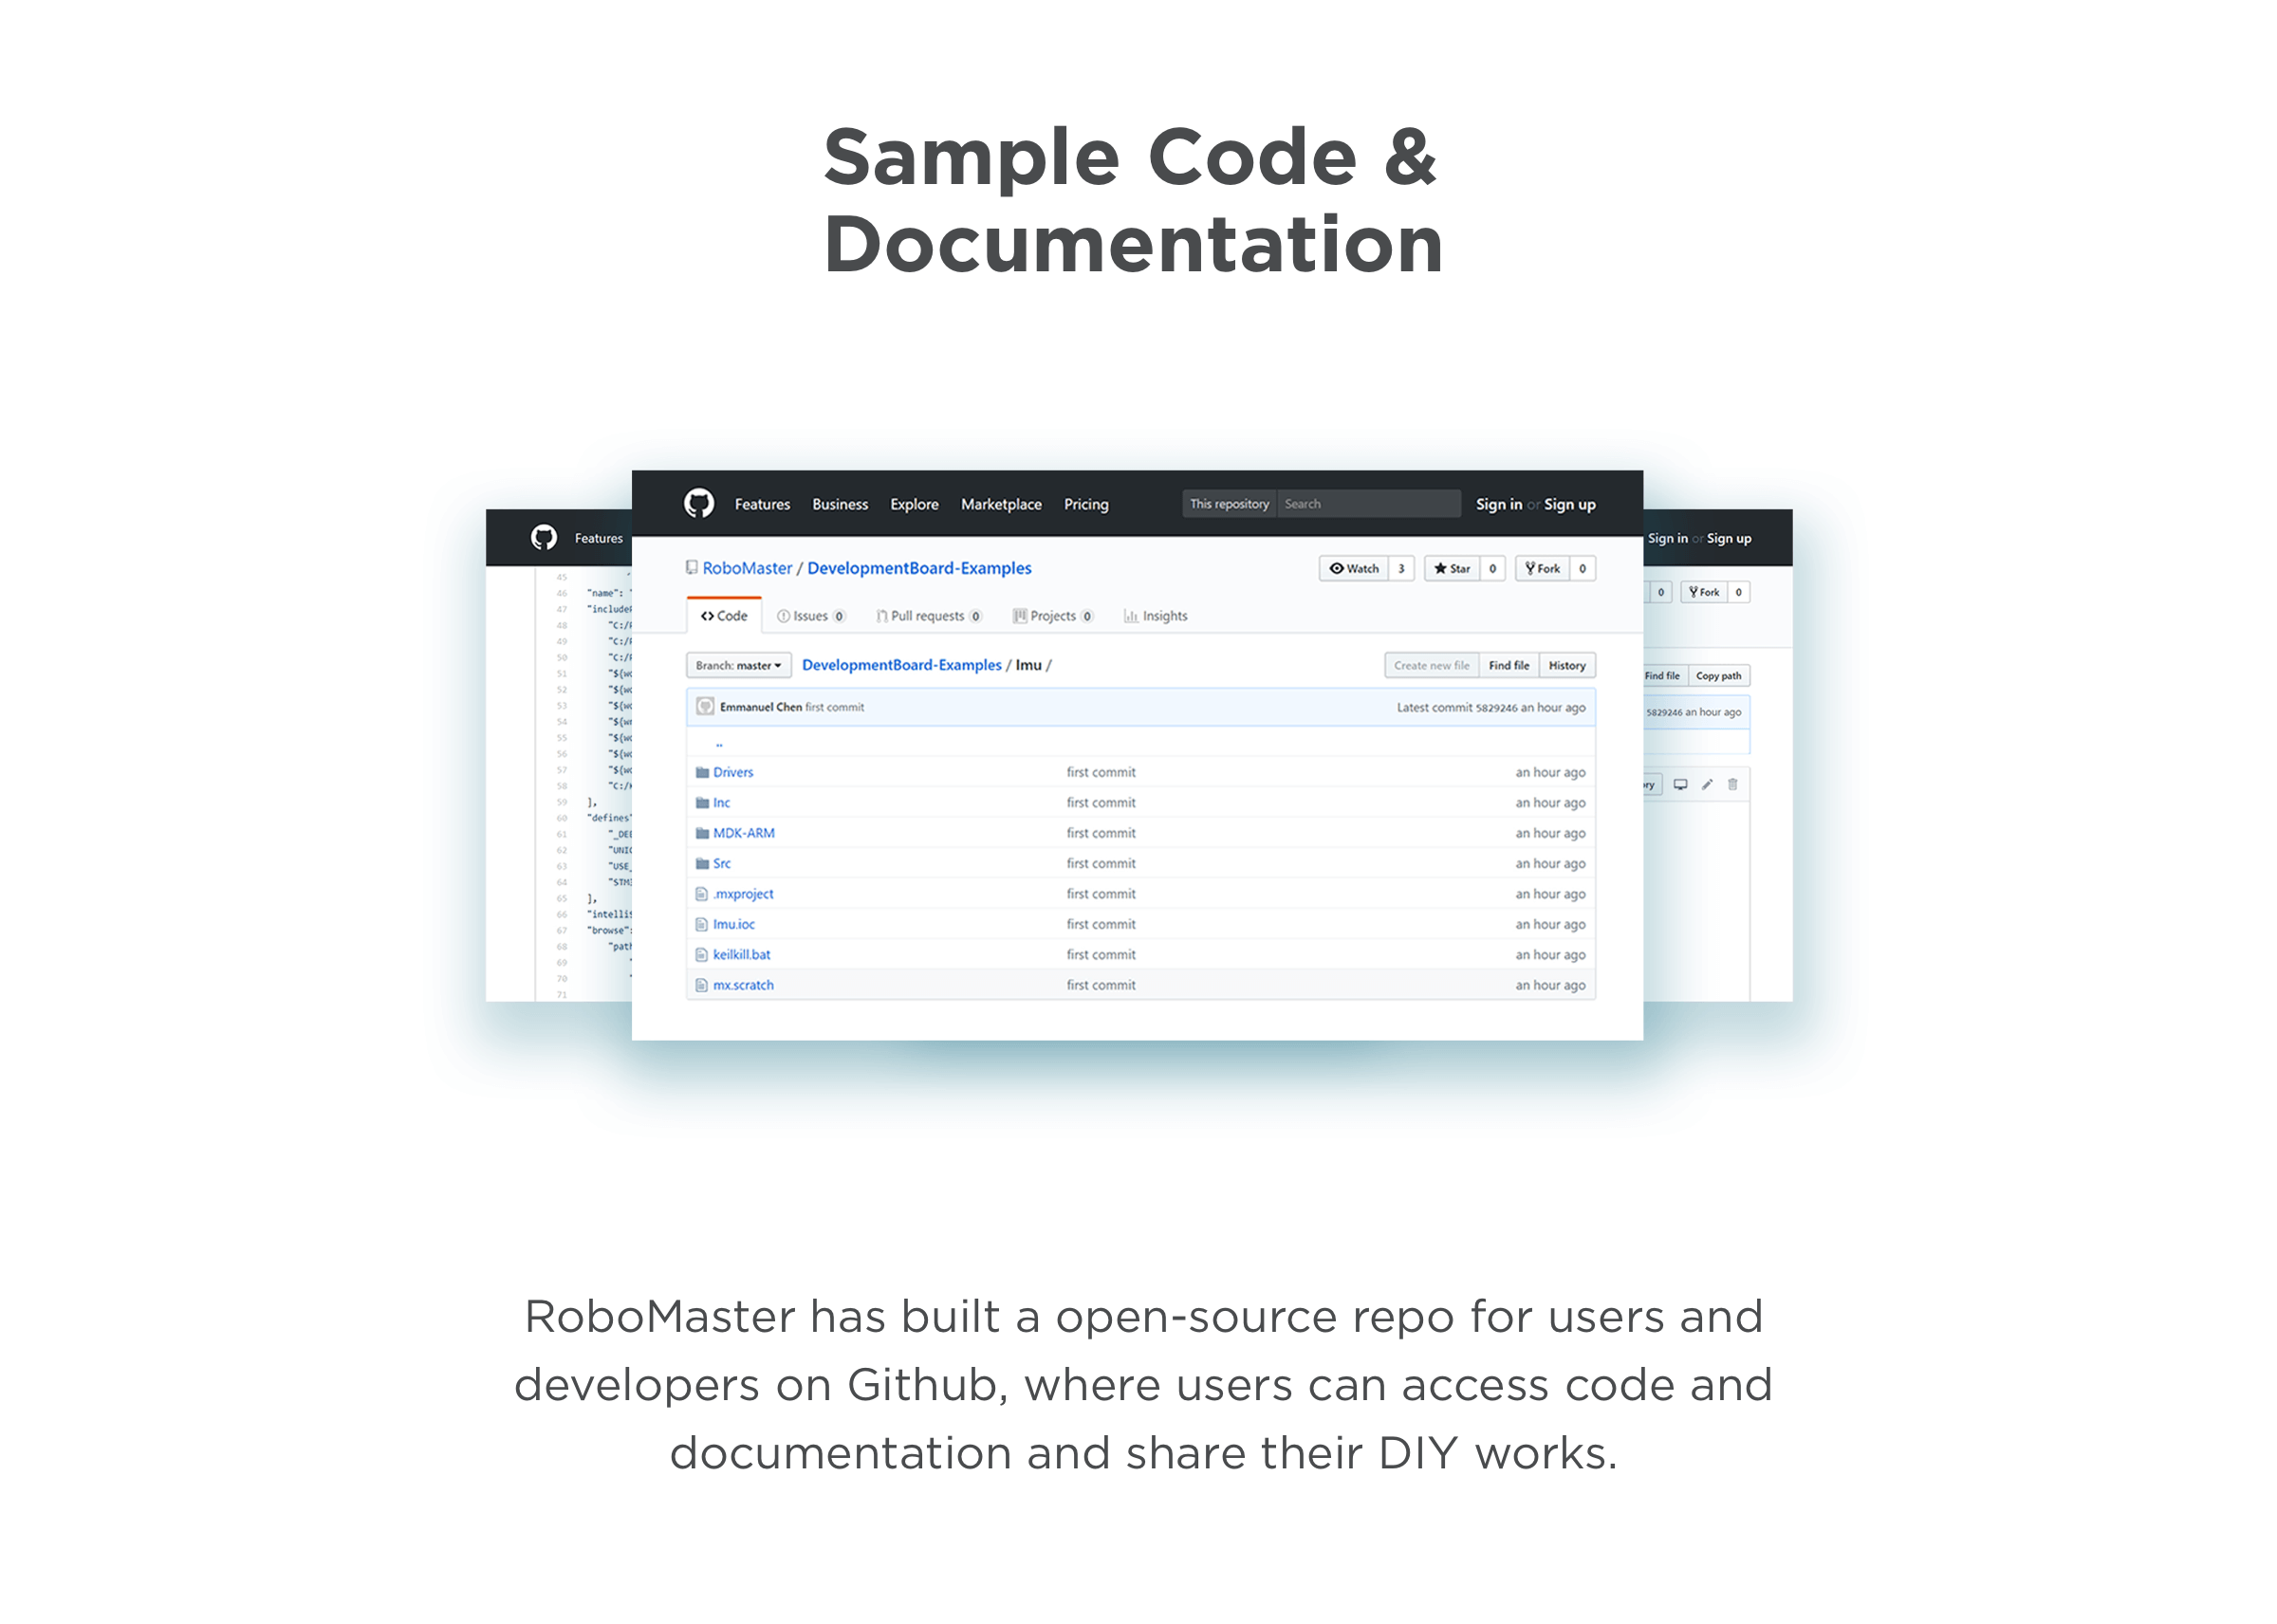 Sample Code and Documentation